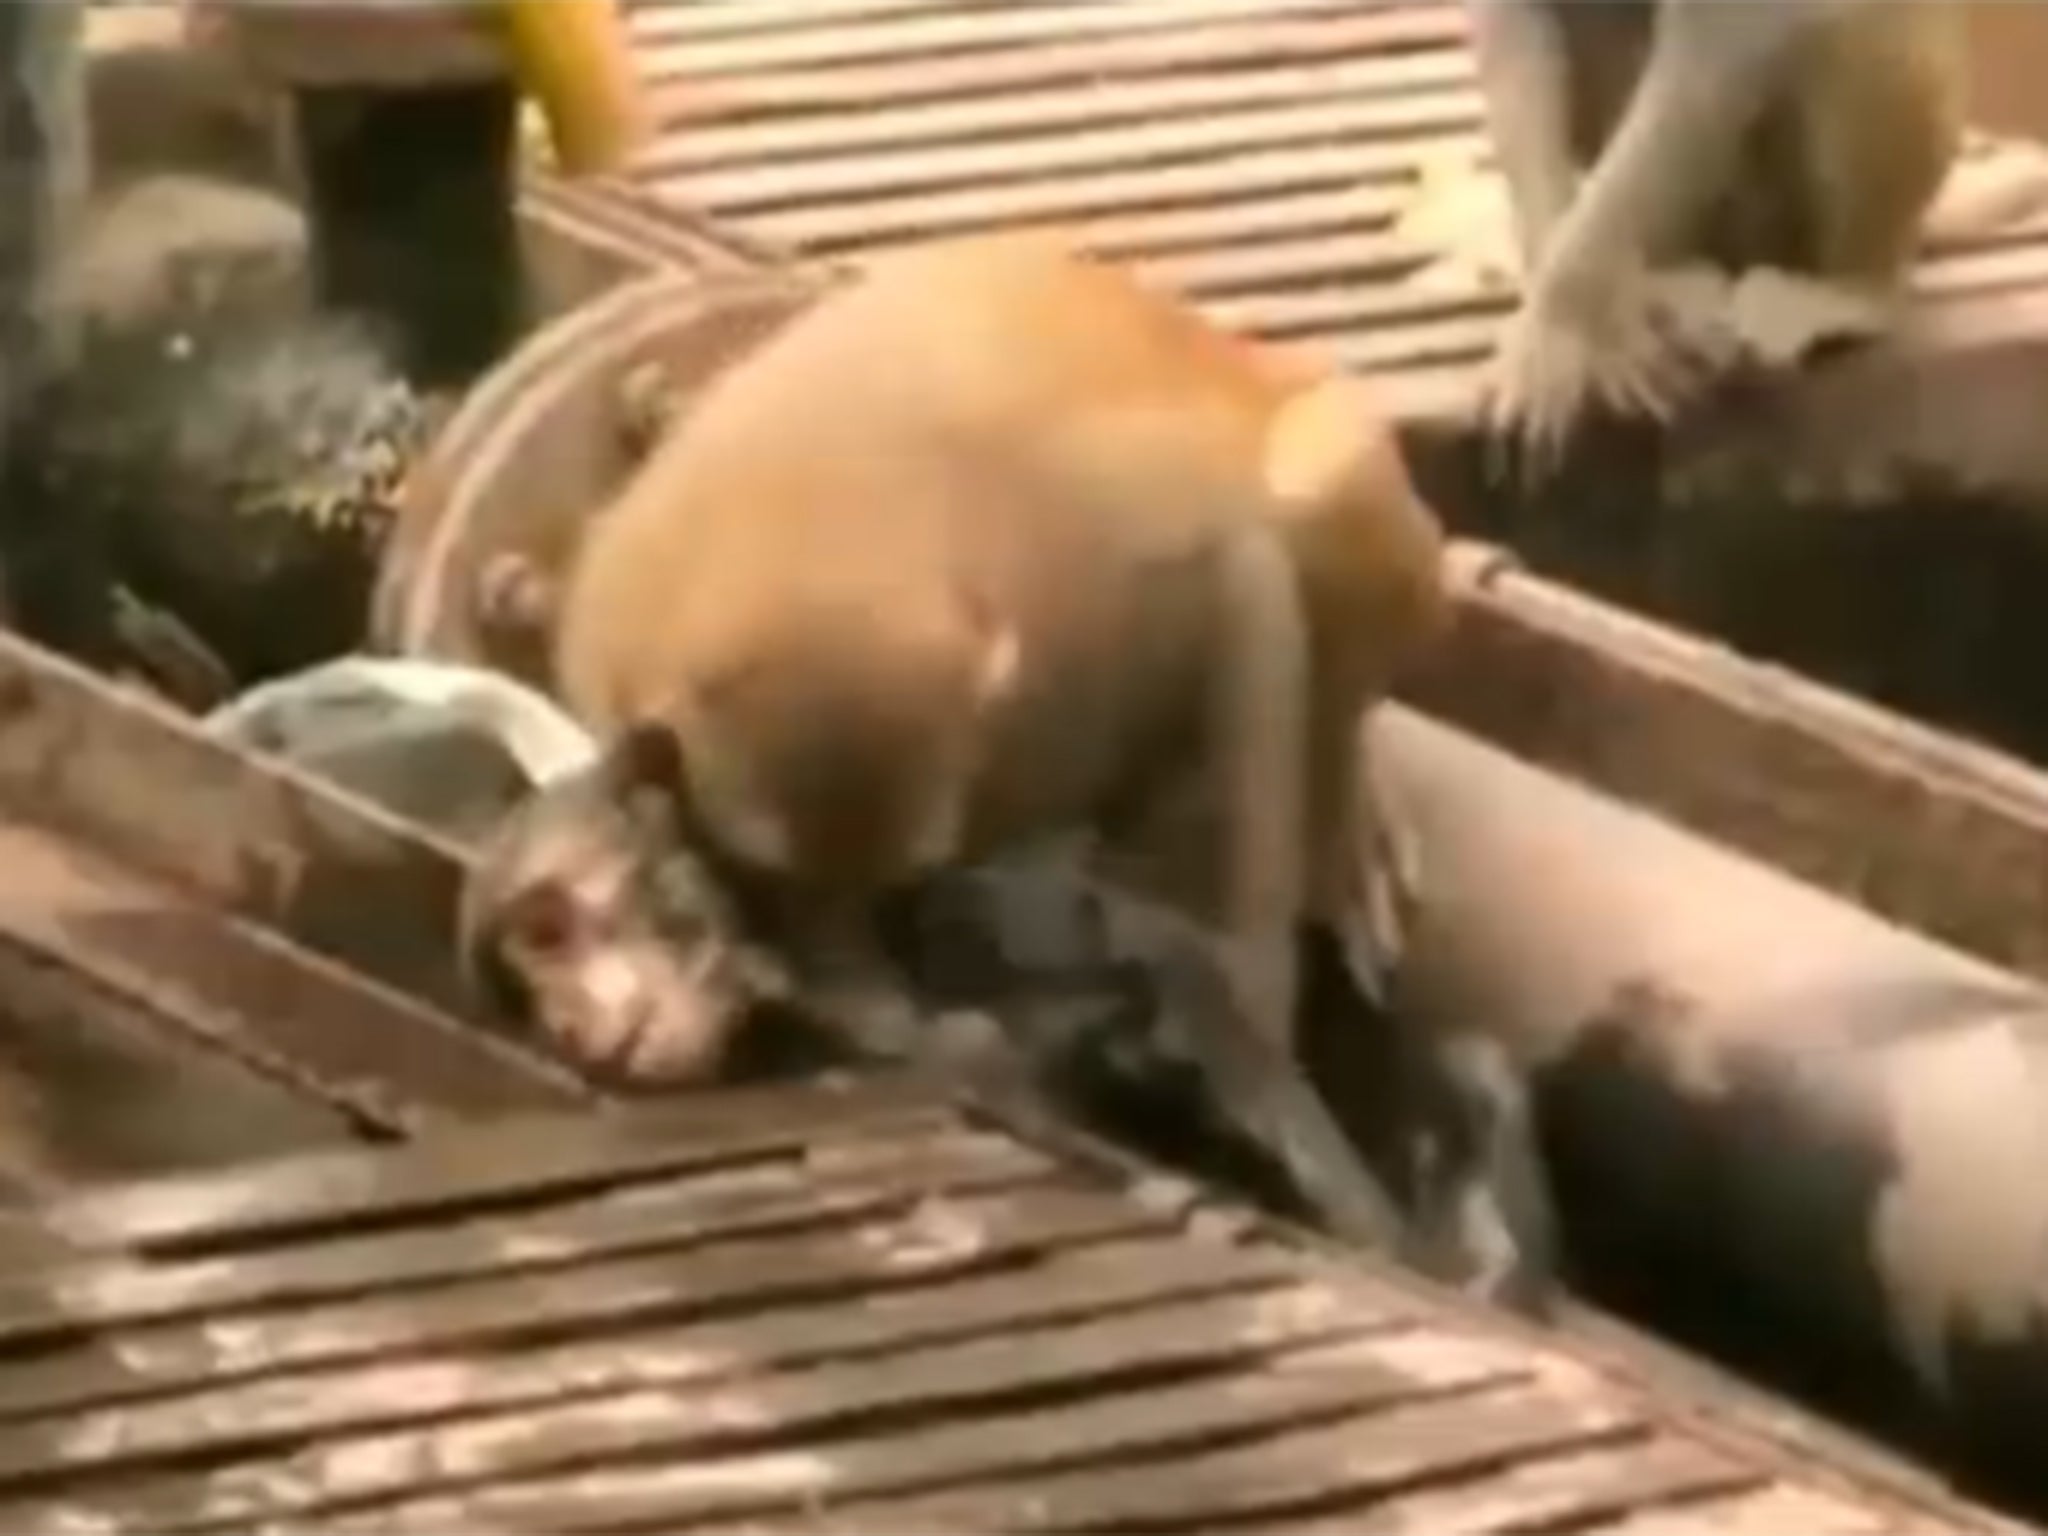 The monkey made several attempts to revive his friend before he regained consciousness 